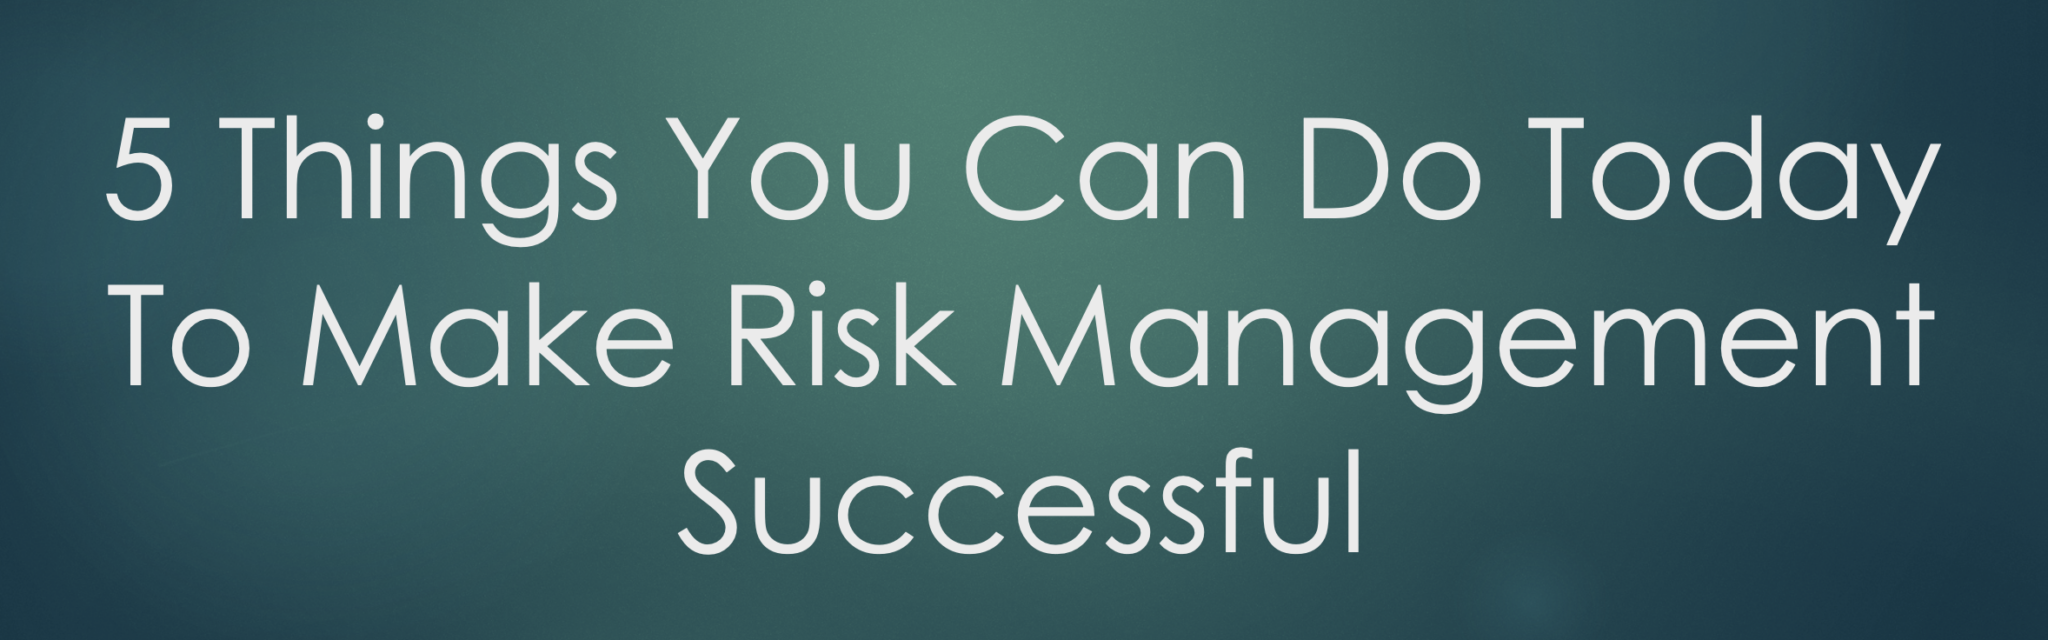 5 Things You Can Do Today To Make Risk Management Successful